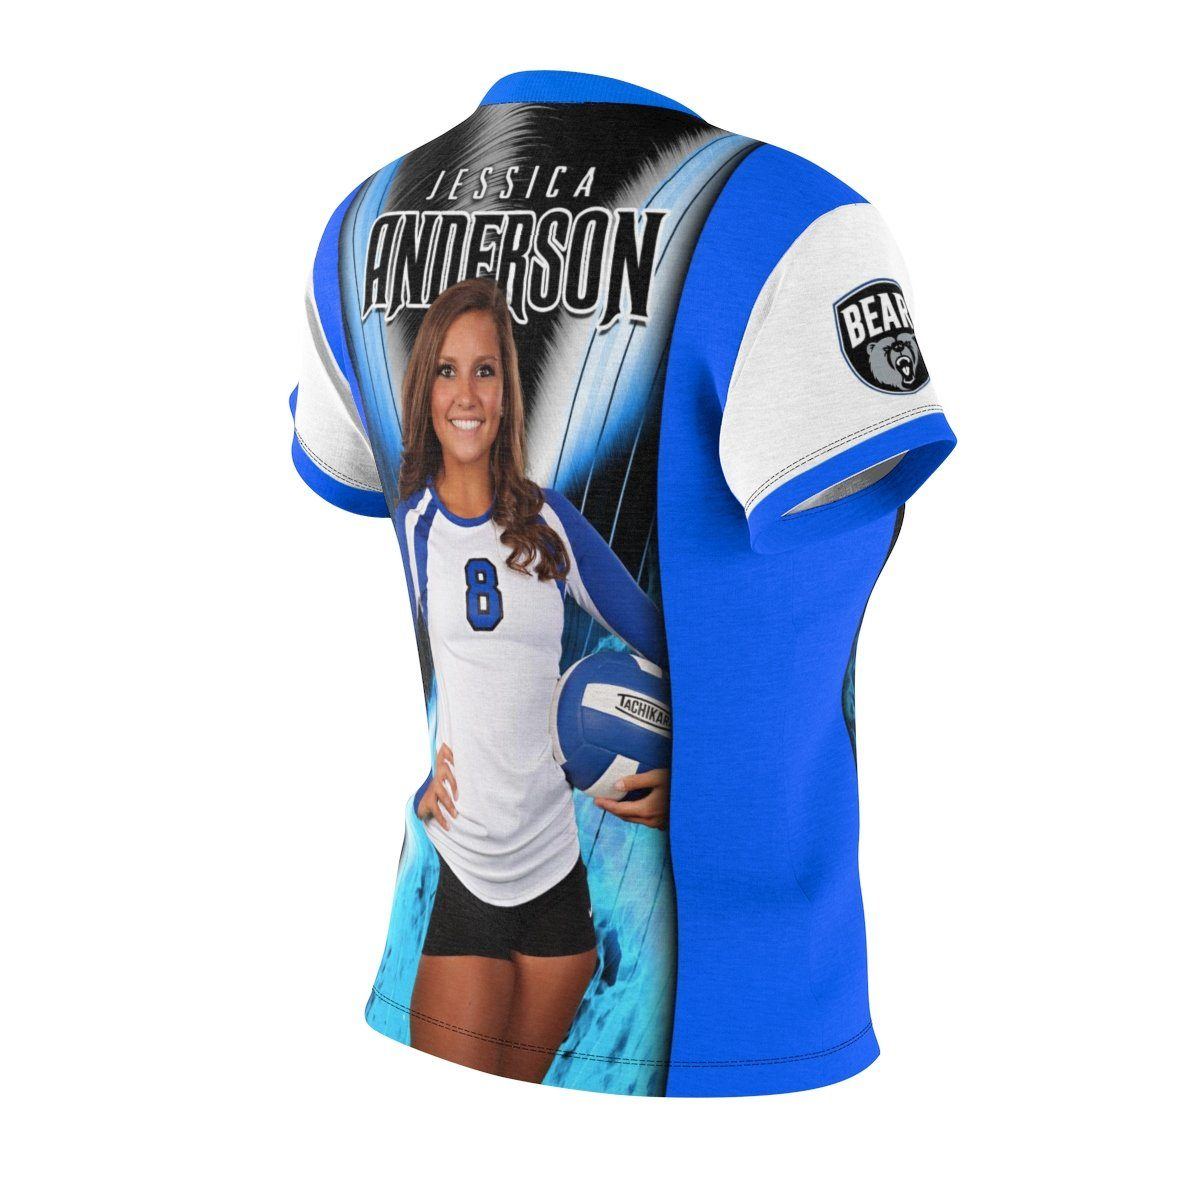 Spin - V.4 - Extreme Sportswear Women's Cut & Sew Template-Photoshop Template - PSMGraphix